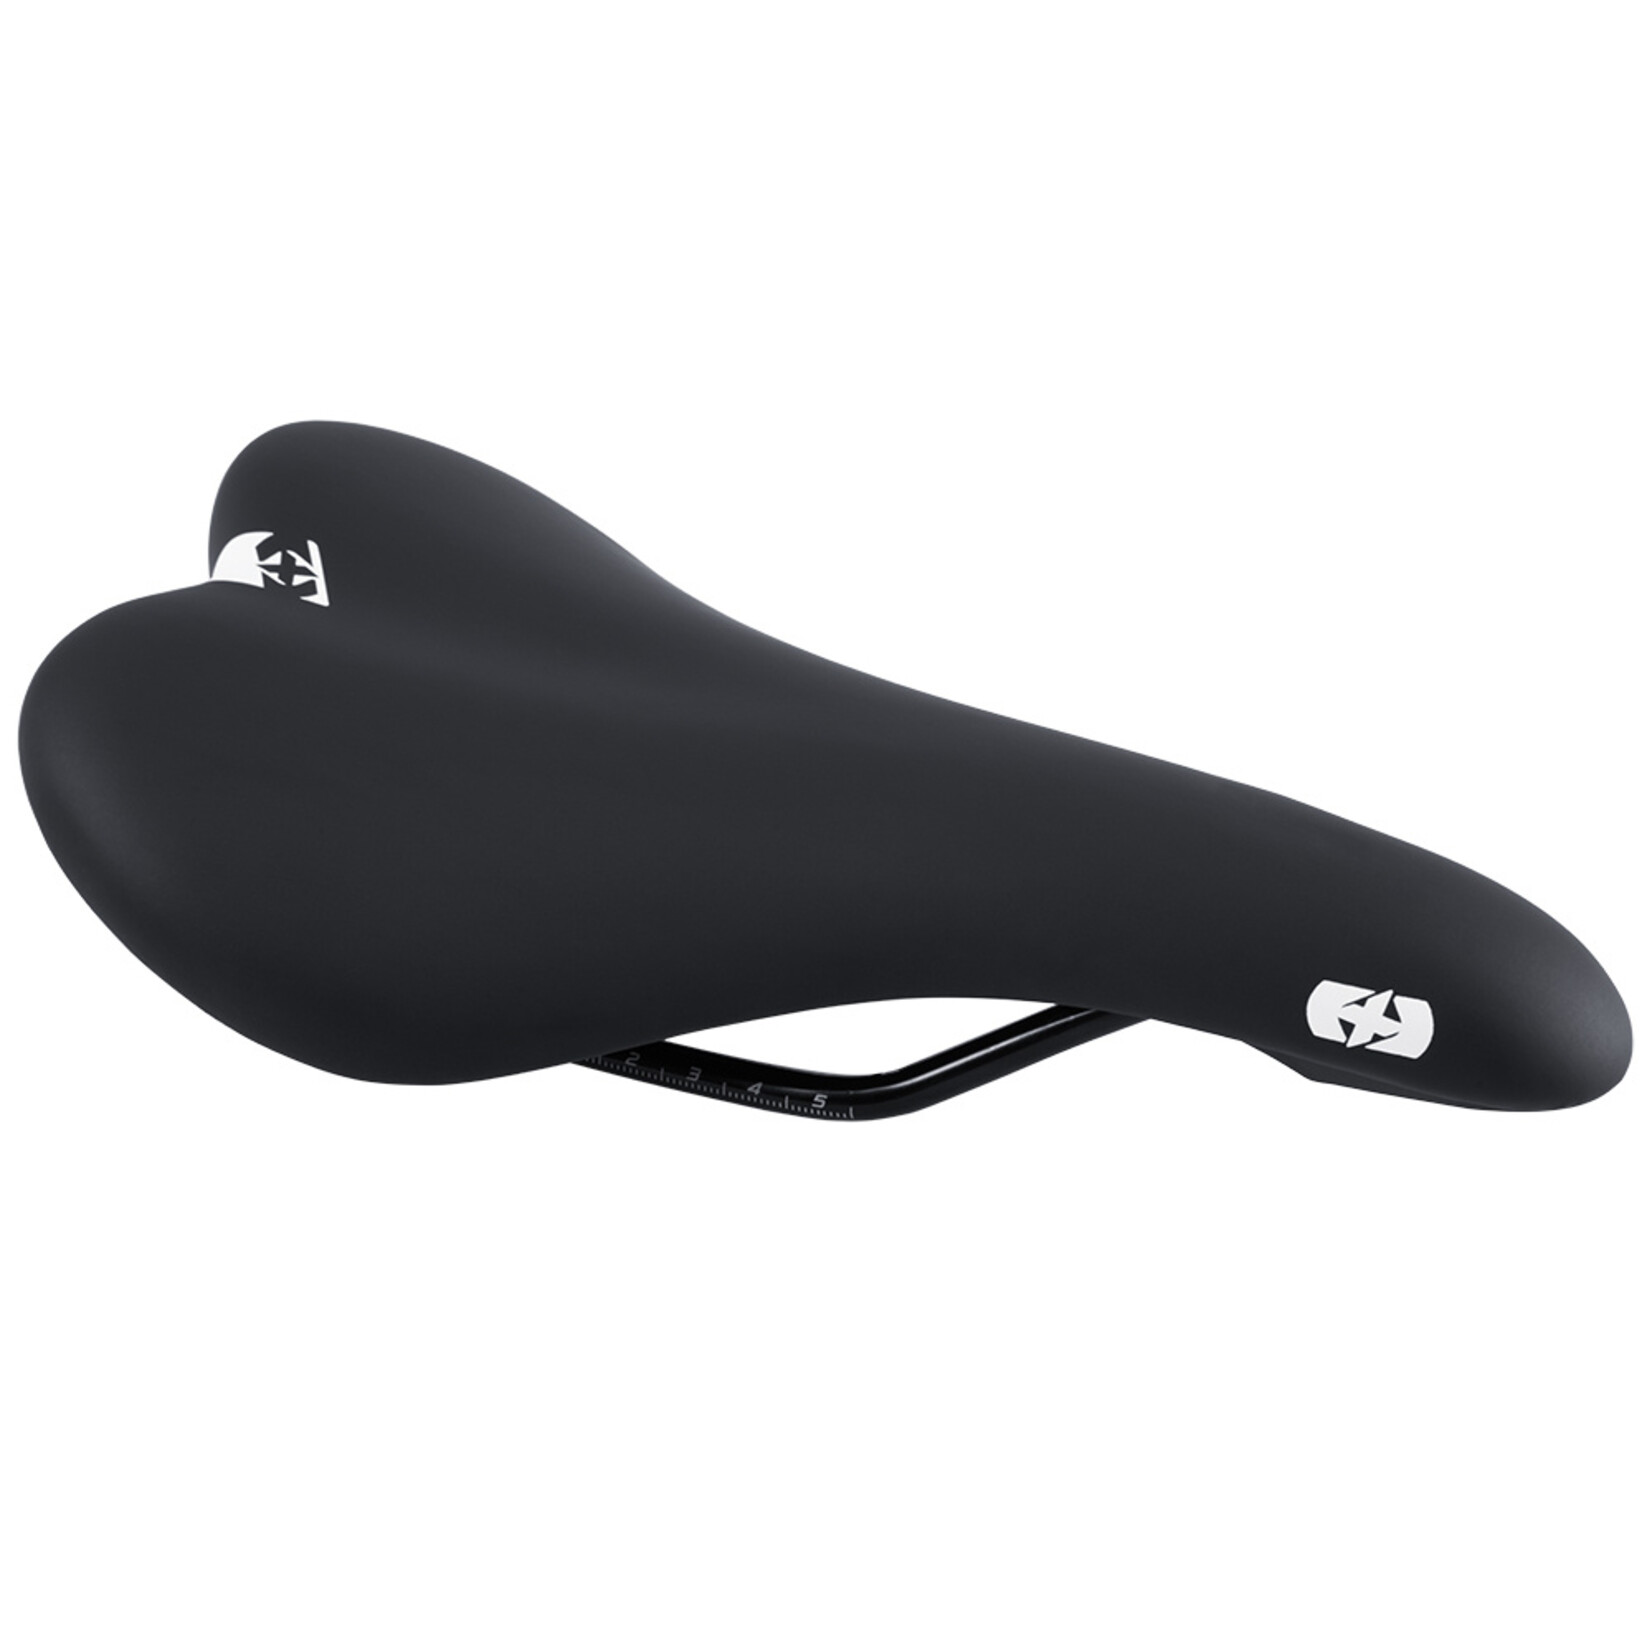 Oxford Oxford Youth Saddle 235 x 125mm